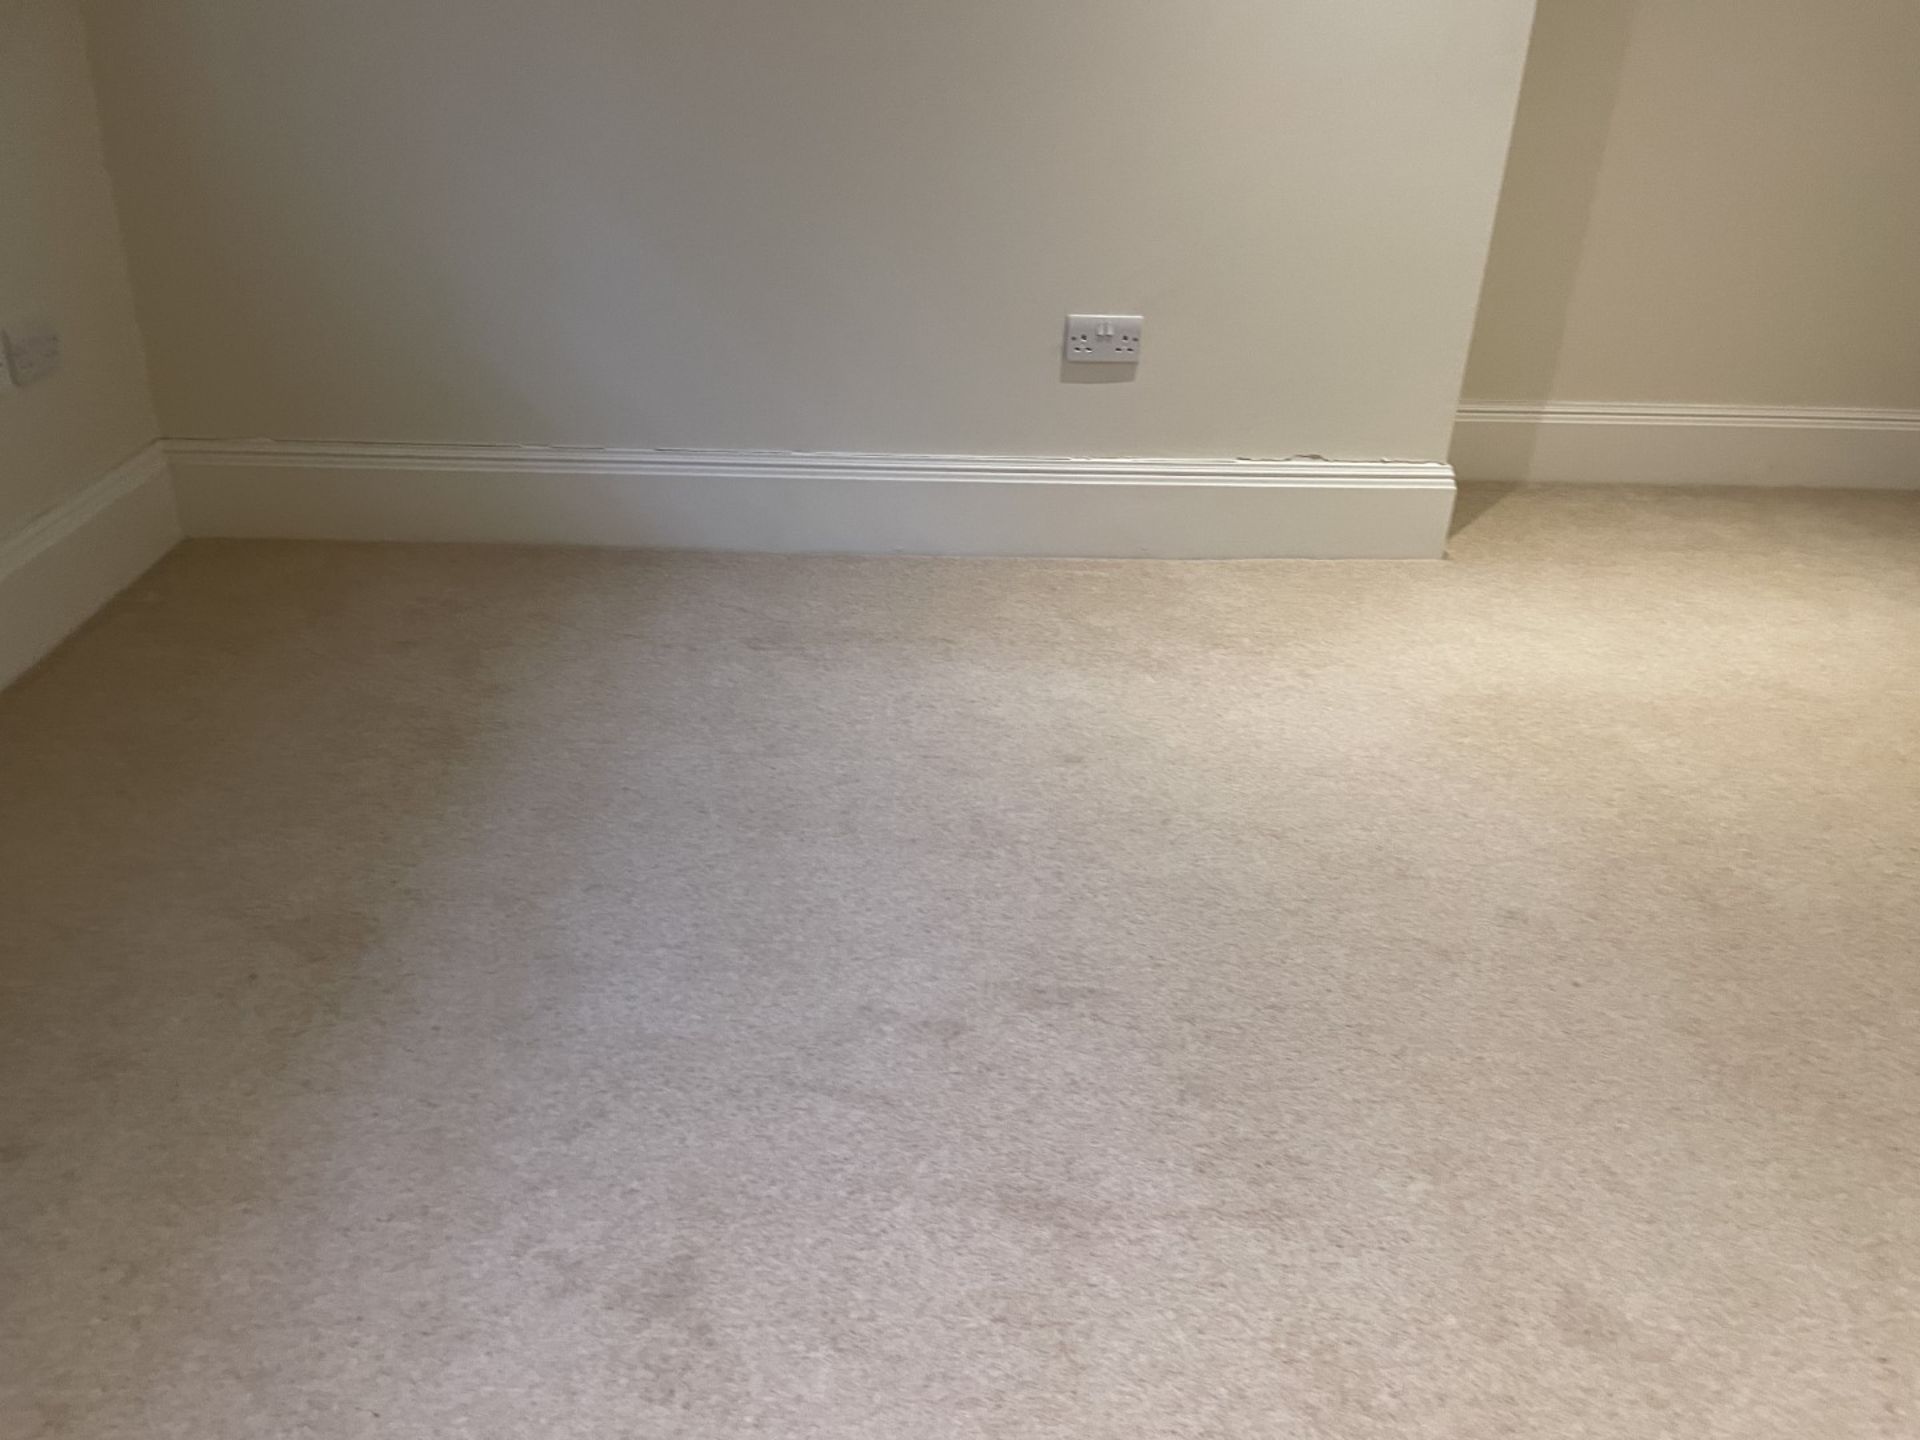 1 x Luxury Wool Bedroom + Dressing Room Carpets in a Neutral Tone with Premium Underlay - Image 2 of 12